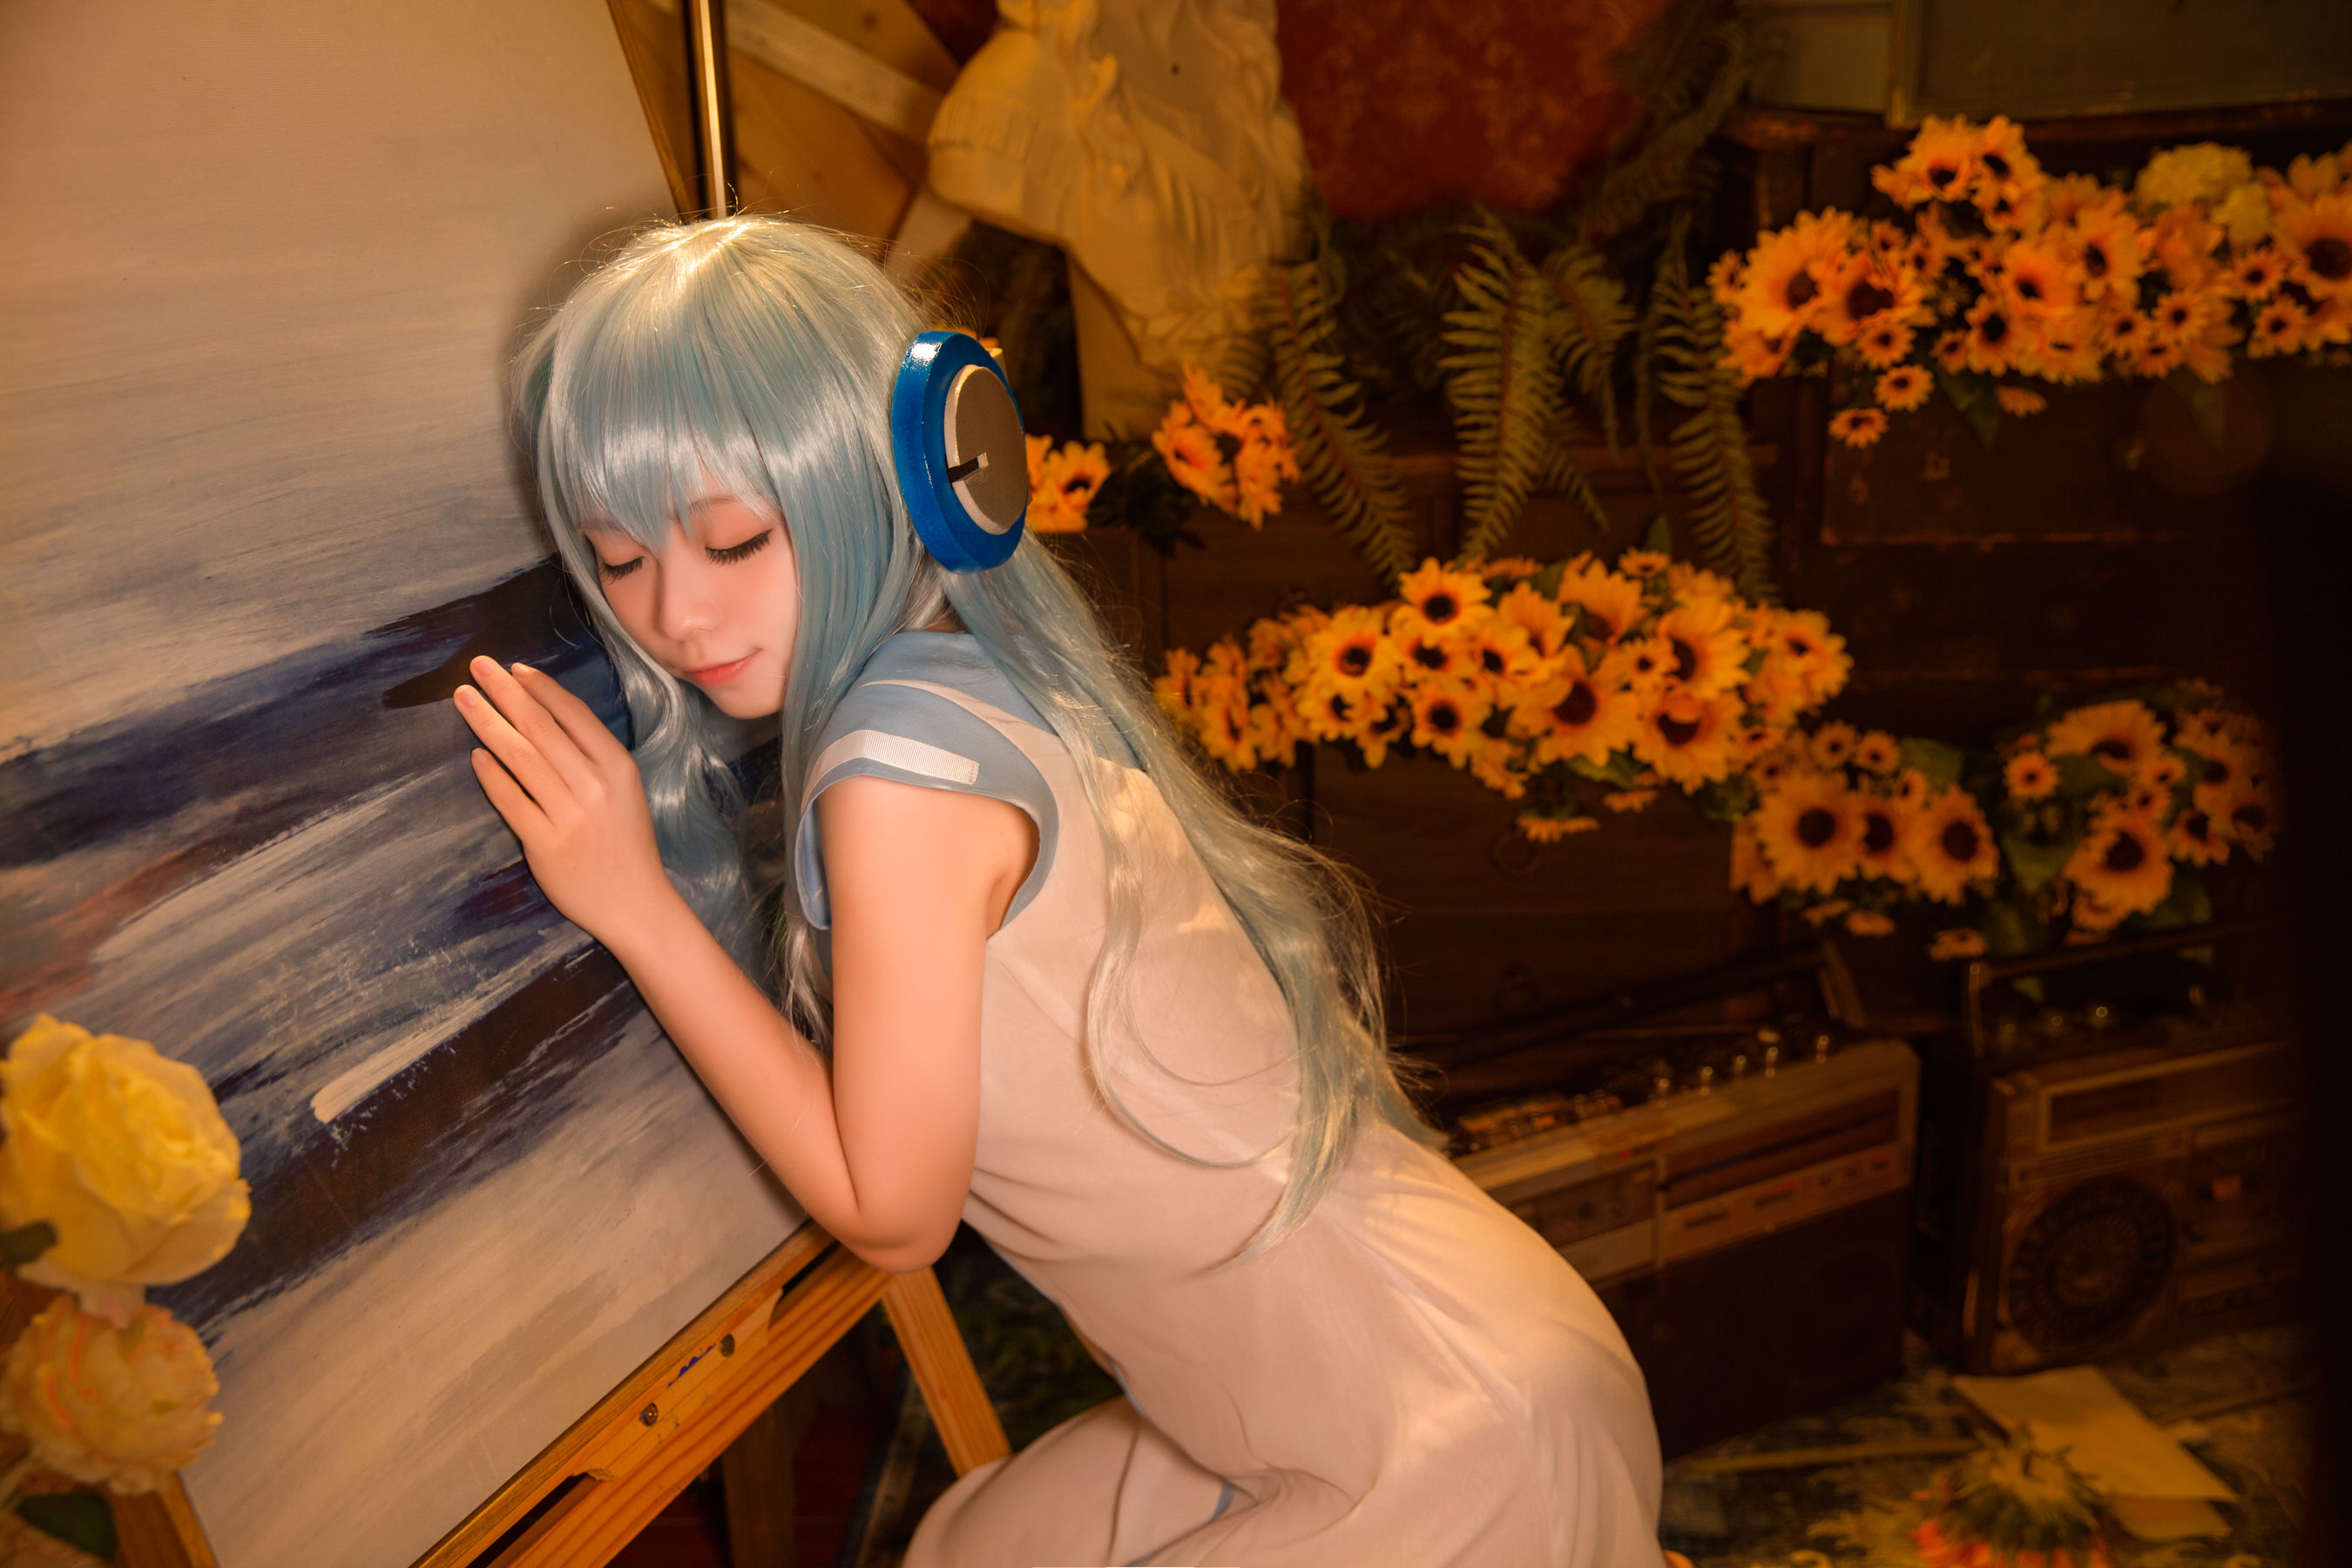 [Net Red COSER Photo] Anime blogger G44 will not be hurt - Music Box Page 7 No.5e2336